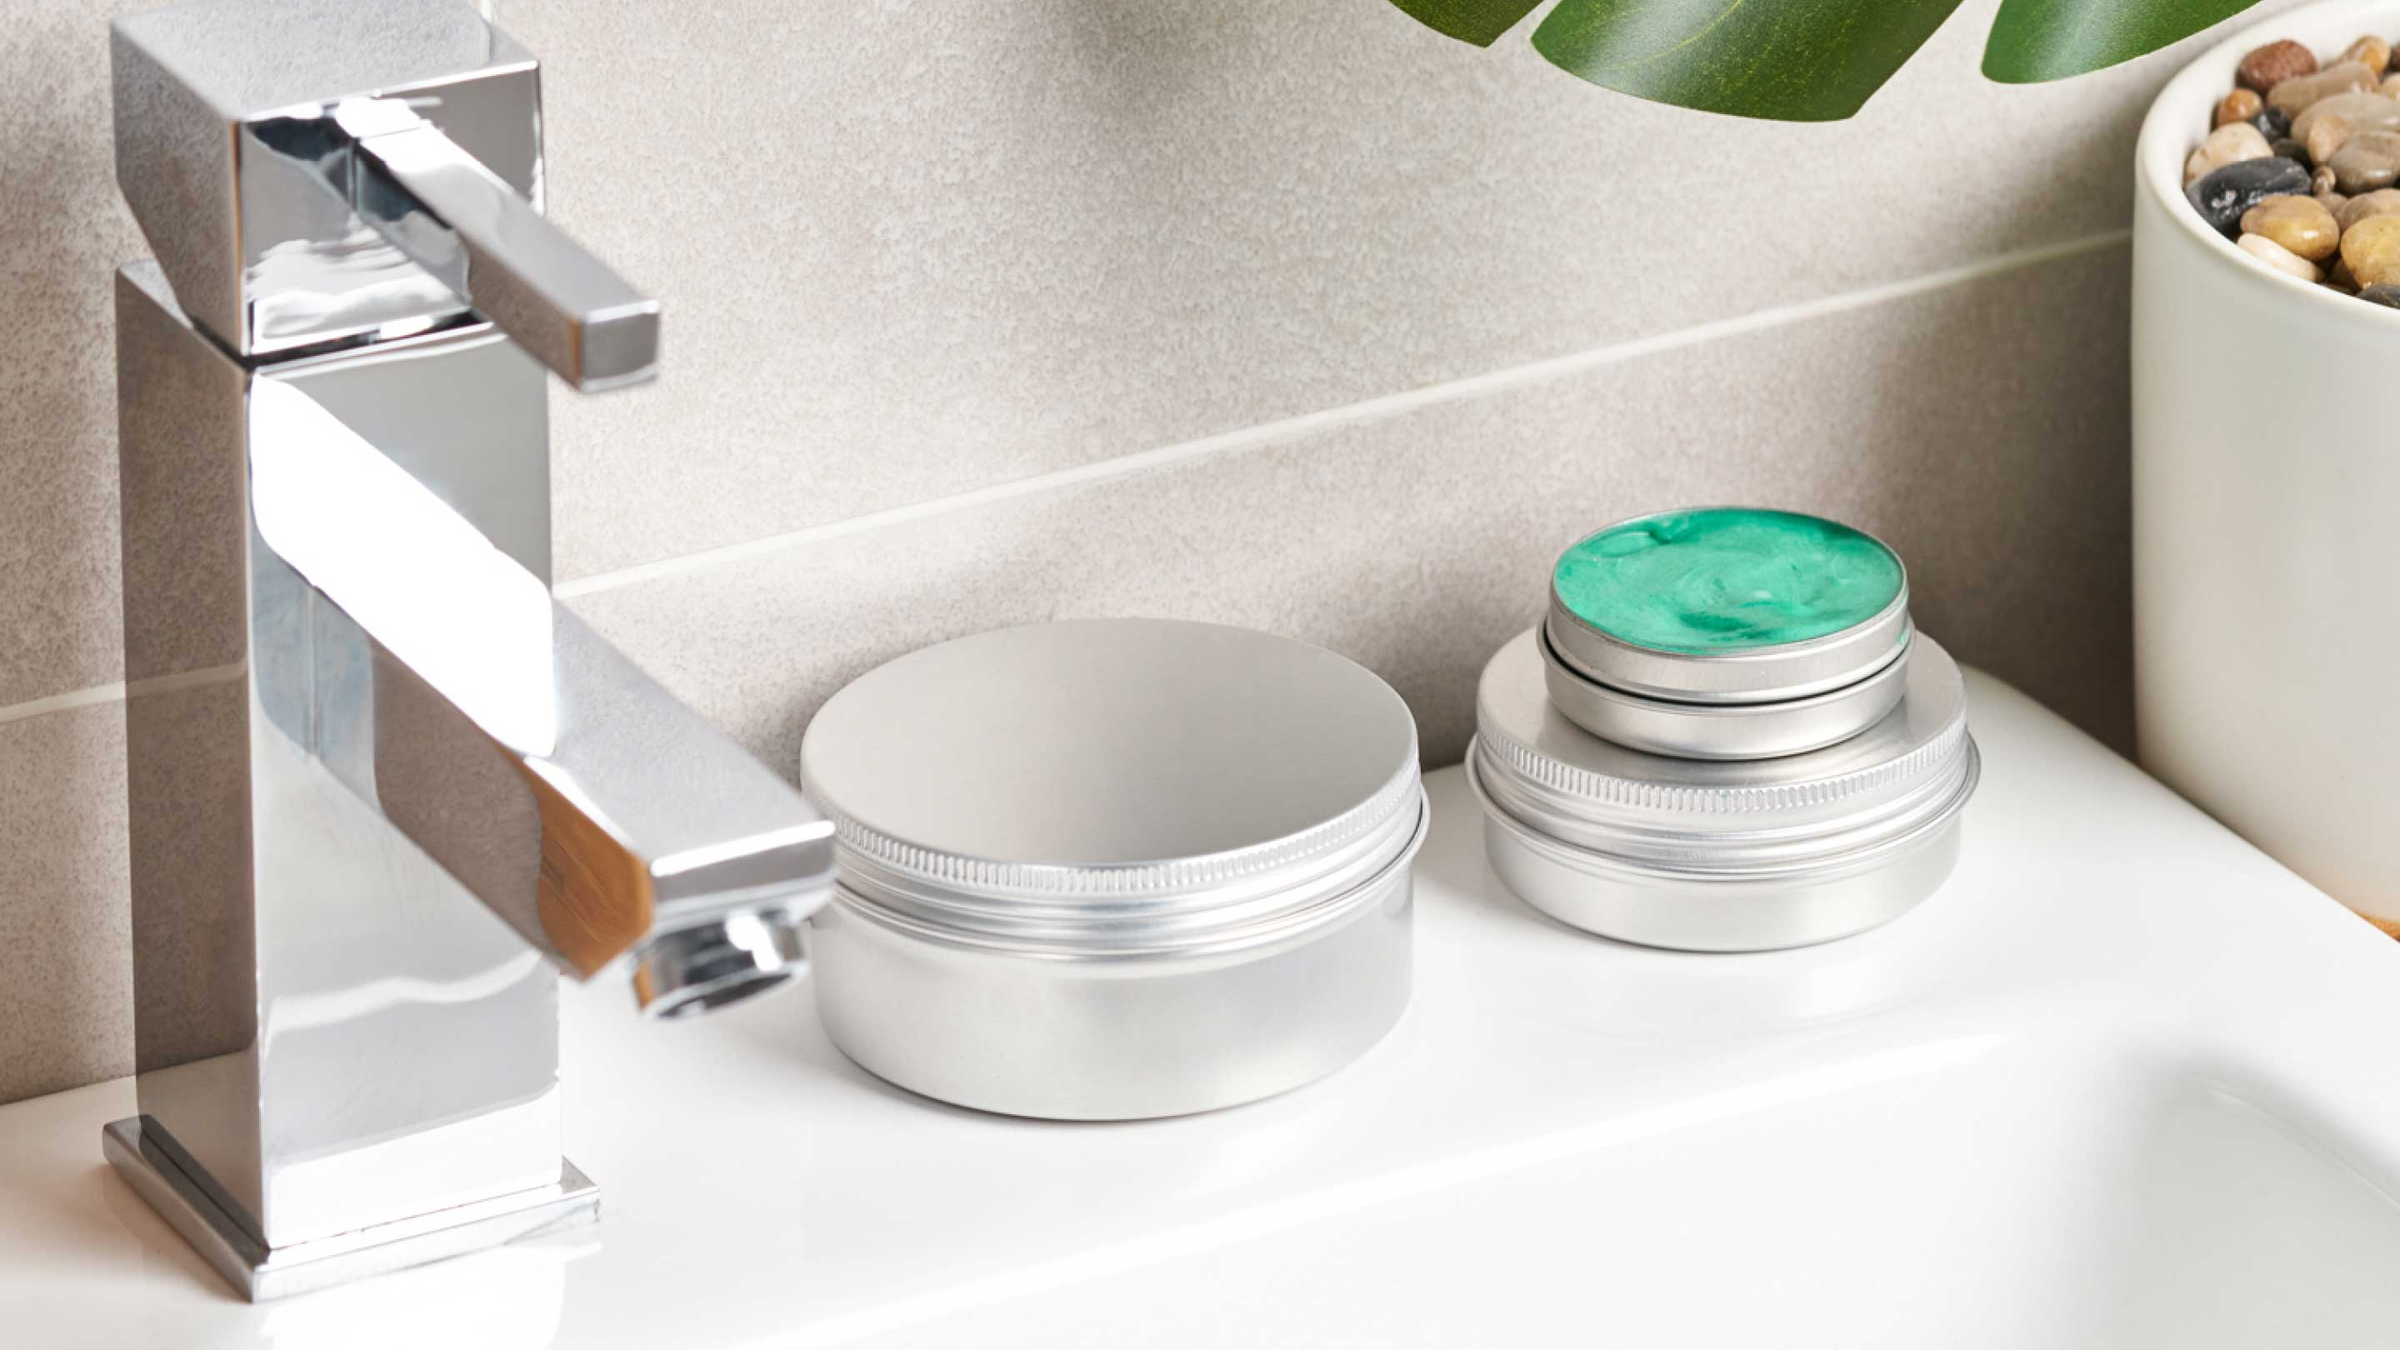 Aluminium packaging with cosmetics in on the side of a bath.